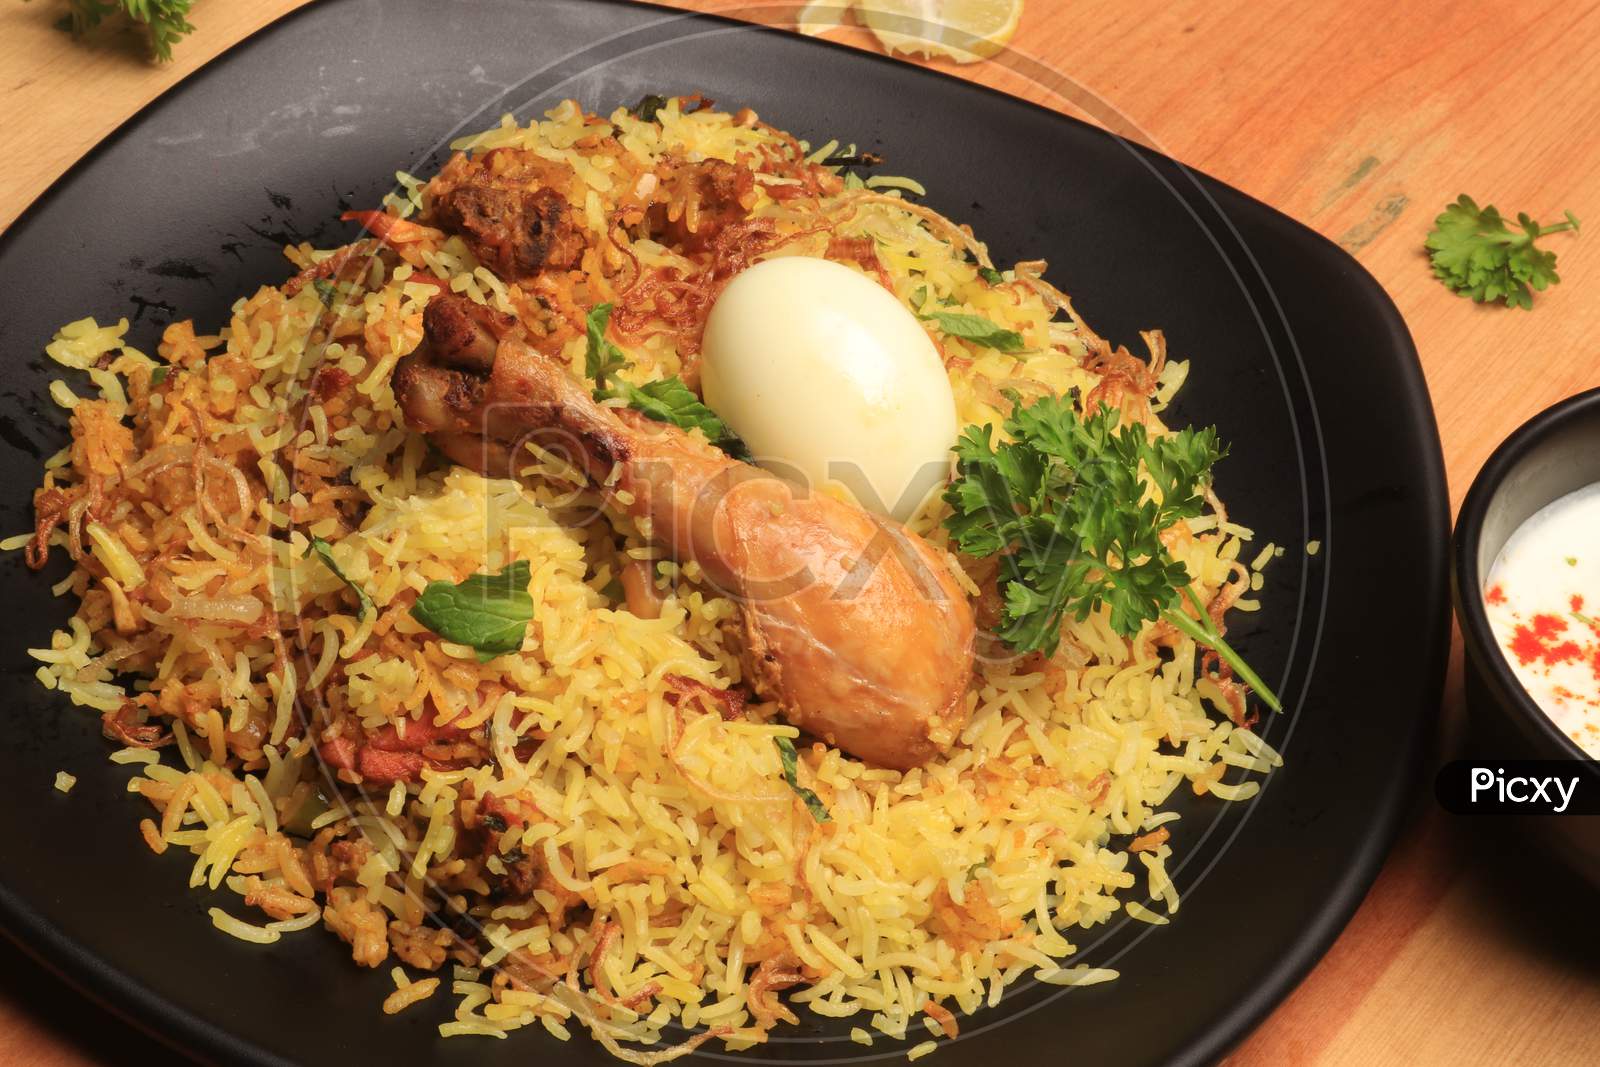 Indian Chicken Biryani served in a terracotta bowl with yogurt over white background. selective focus